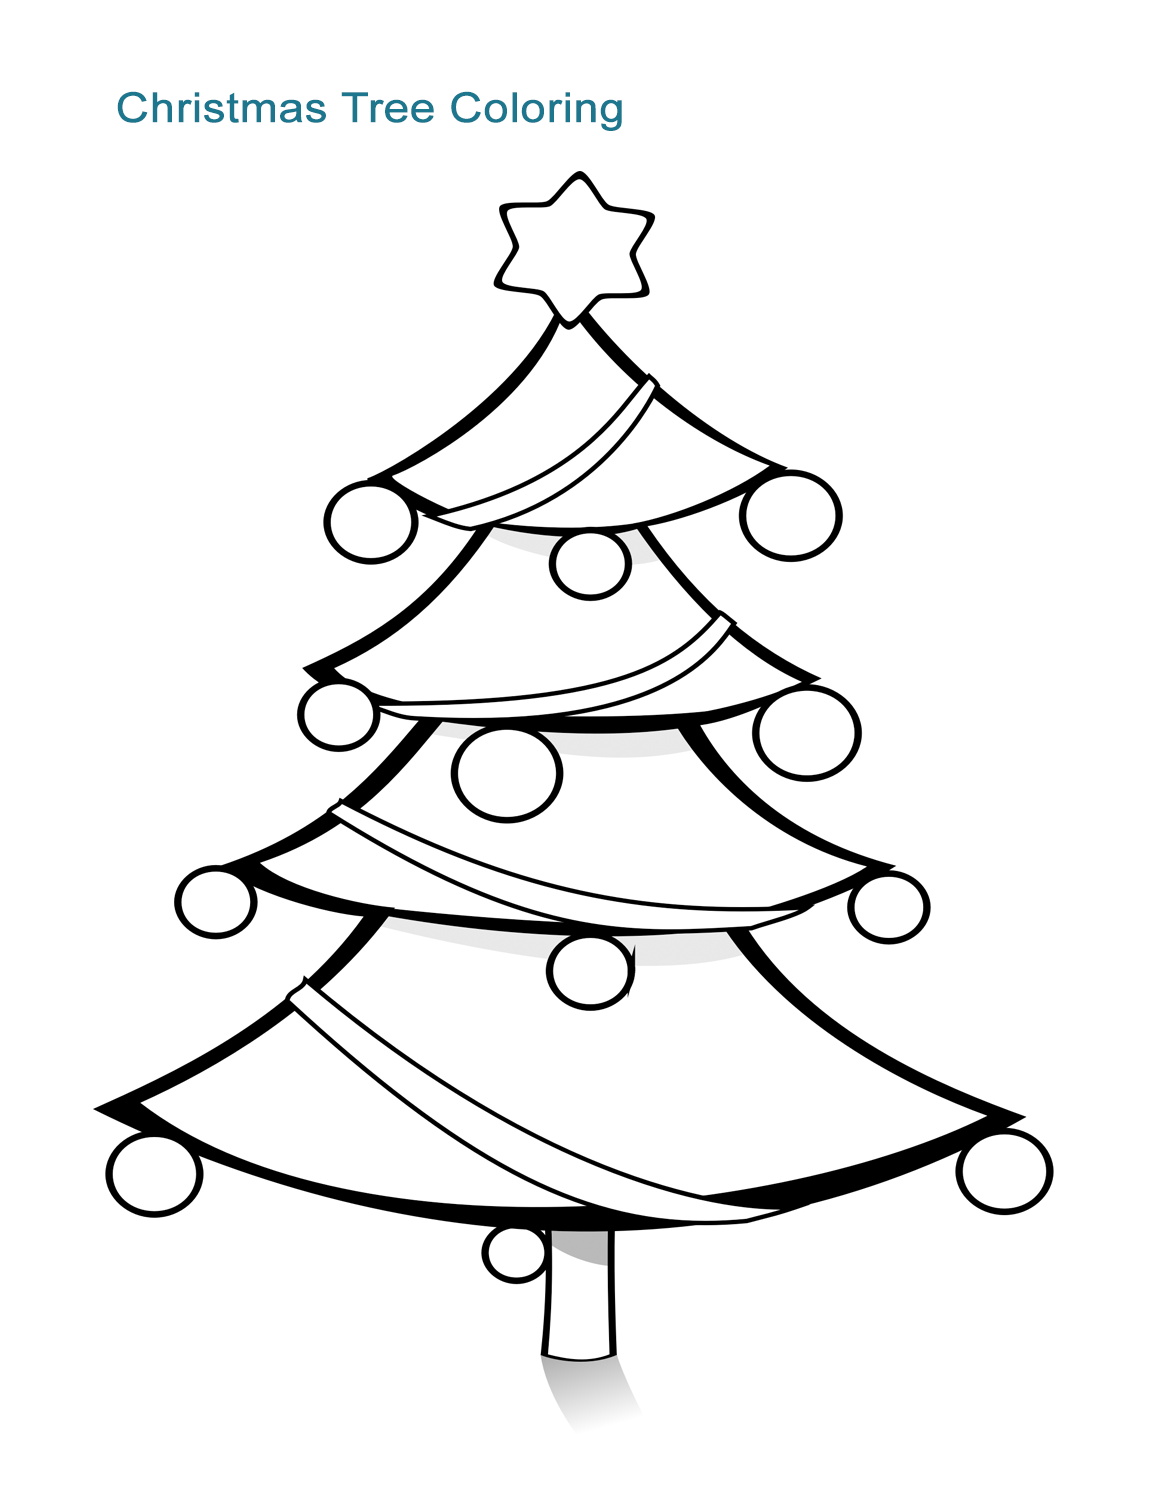 10 Christmas Coloring Worksheets For All Ages ALL ESL